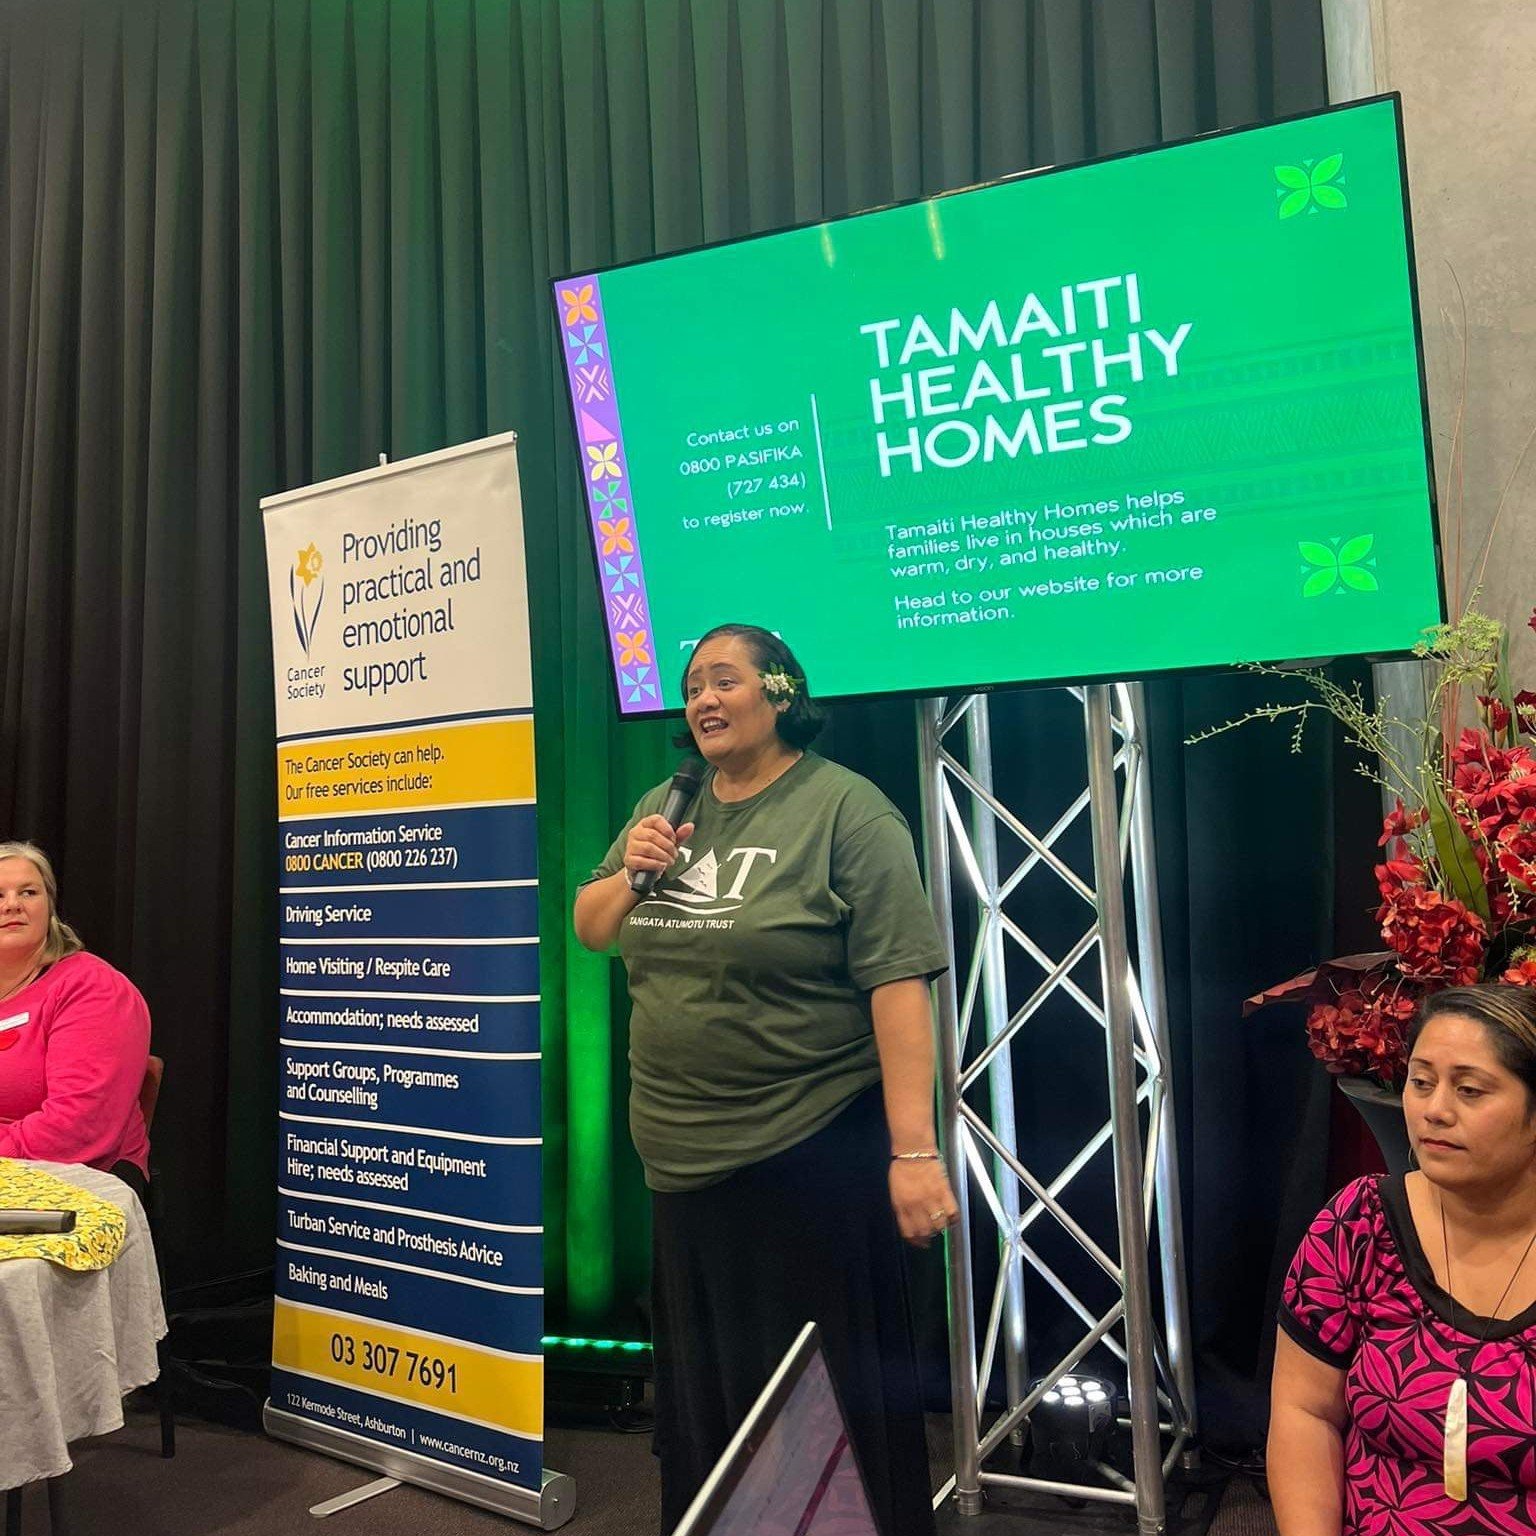 Mālō 'aupito to our Tongan famili that showed up last night! 👊🏾

Always a great time connecting with our community members and discussing the need to prioritize our health 🇹🇴

We also provided immunisations last night and are appreciative of our 